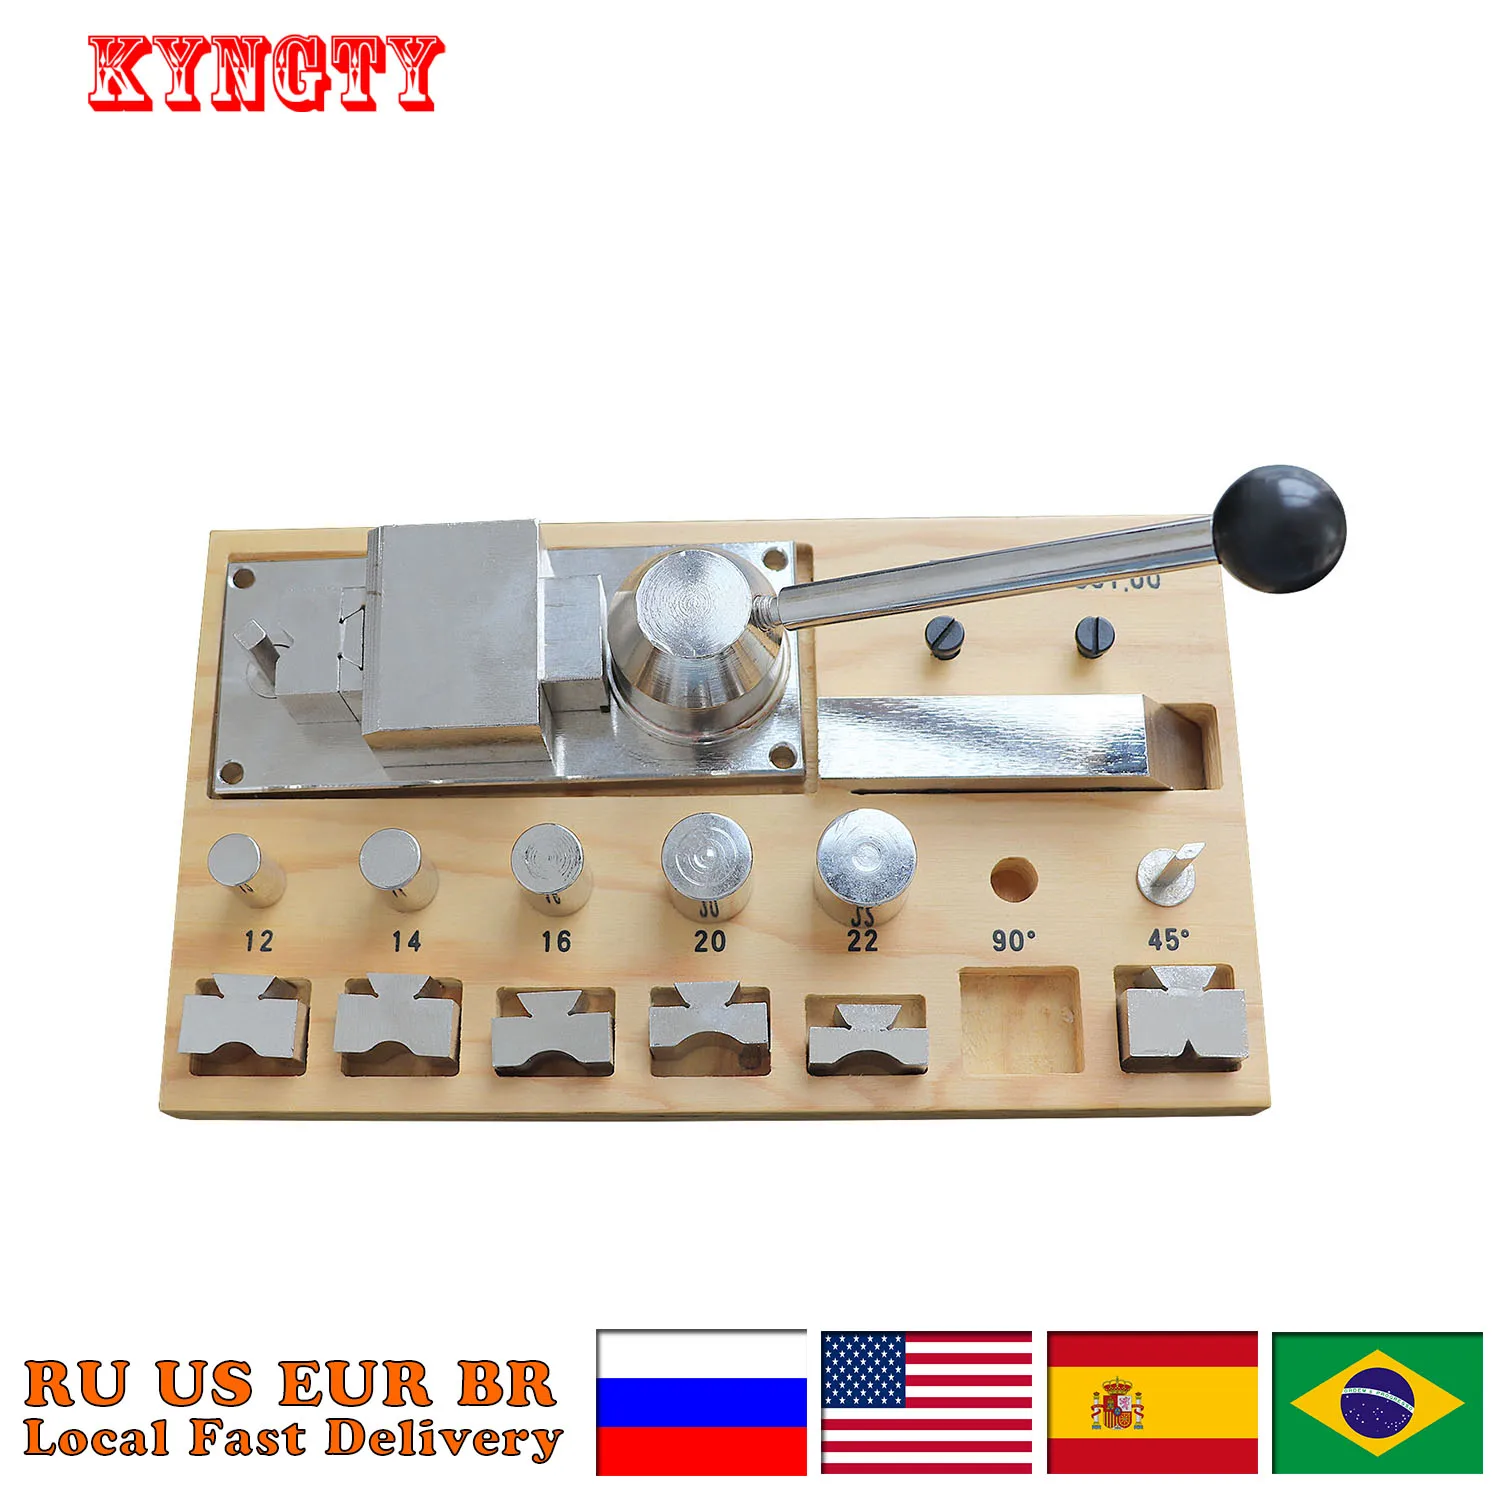 Ring Bender Small Plastic Bending Machine Gold, Silver And Copper Bending Machine Forming Round Machine Jewelry Equipment Tools